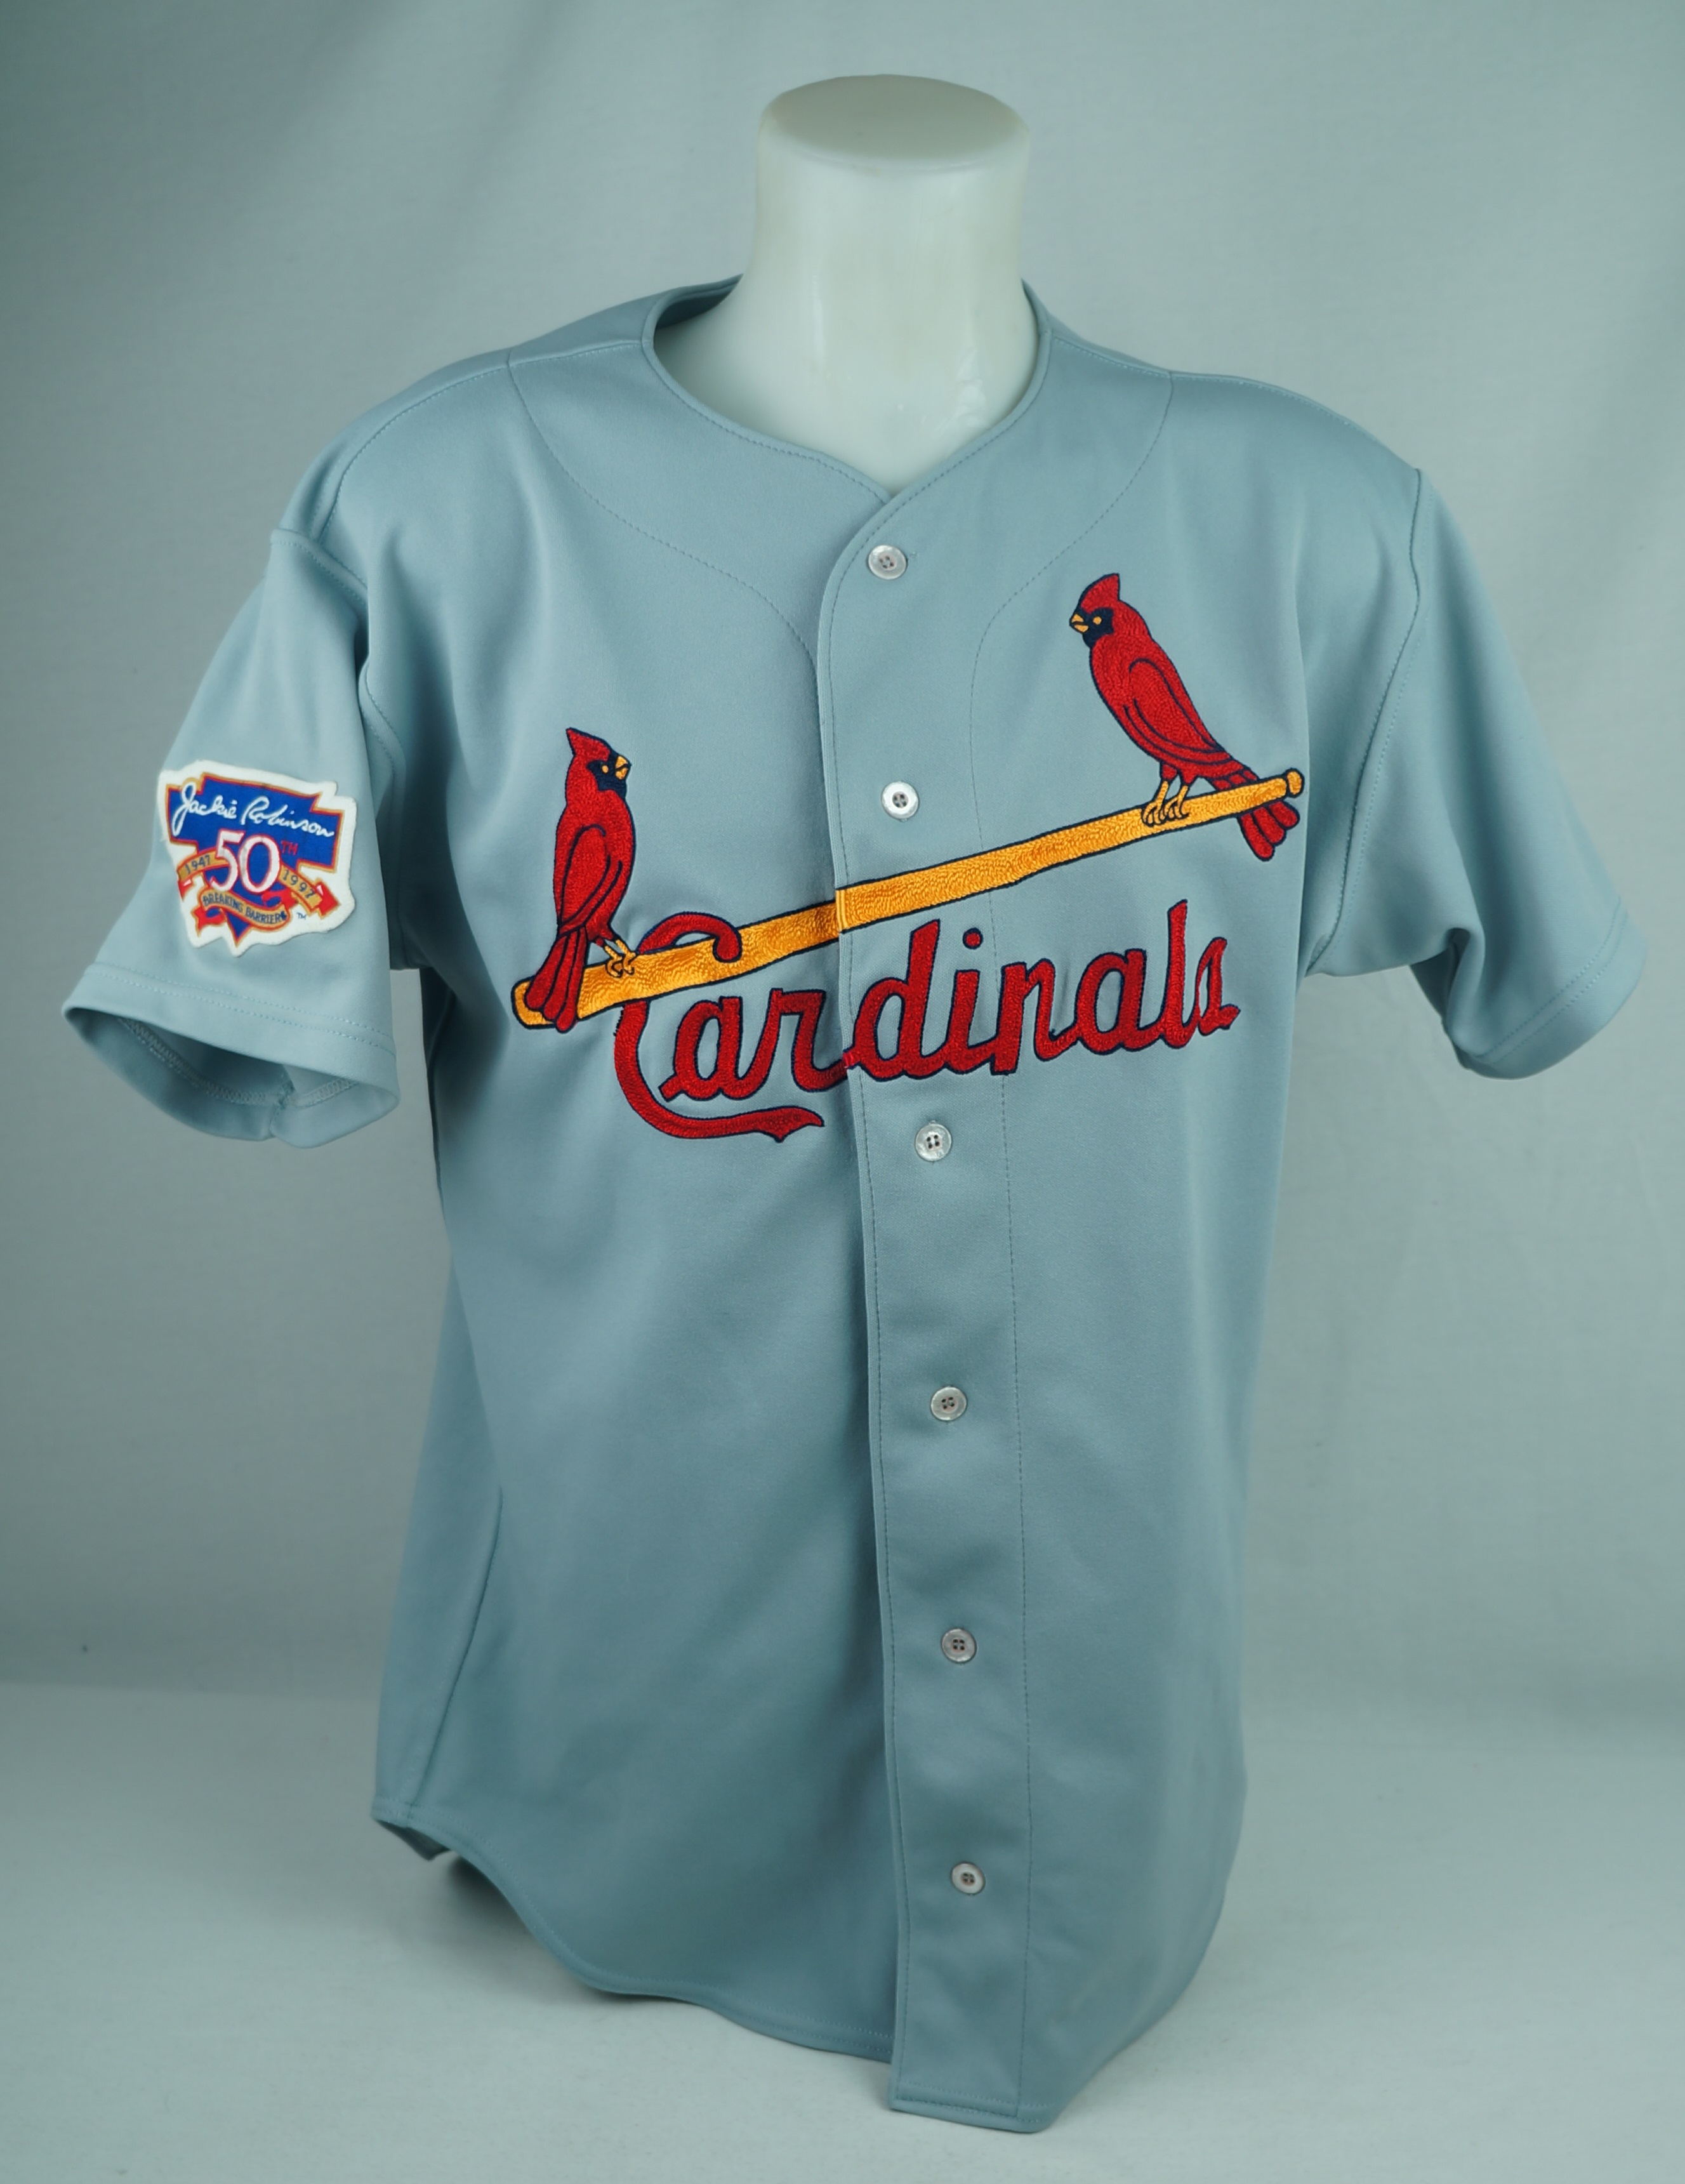 st louis cardinals game used jersey